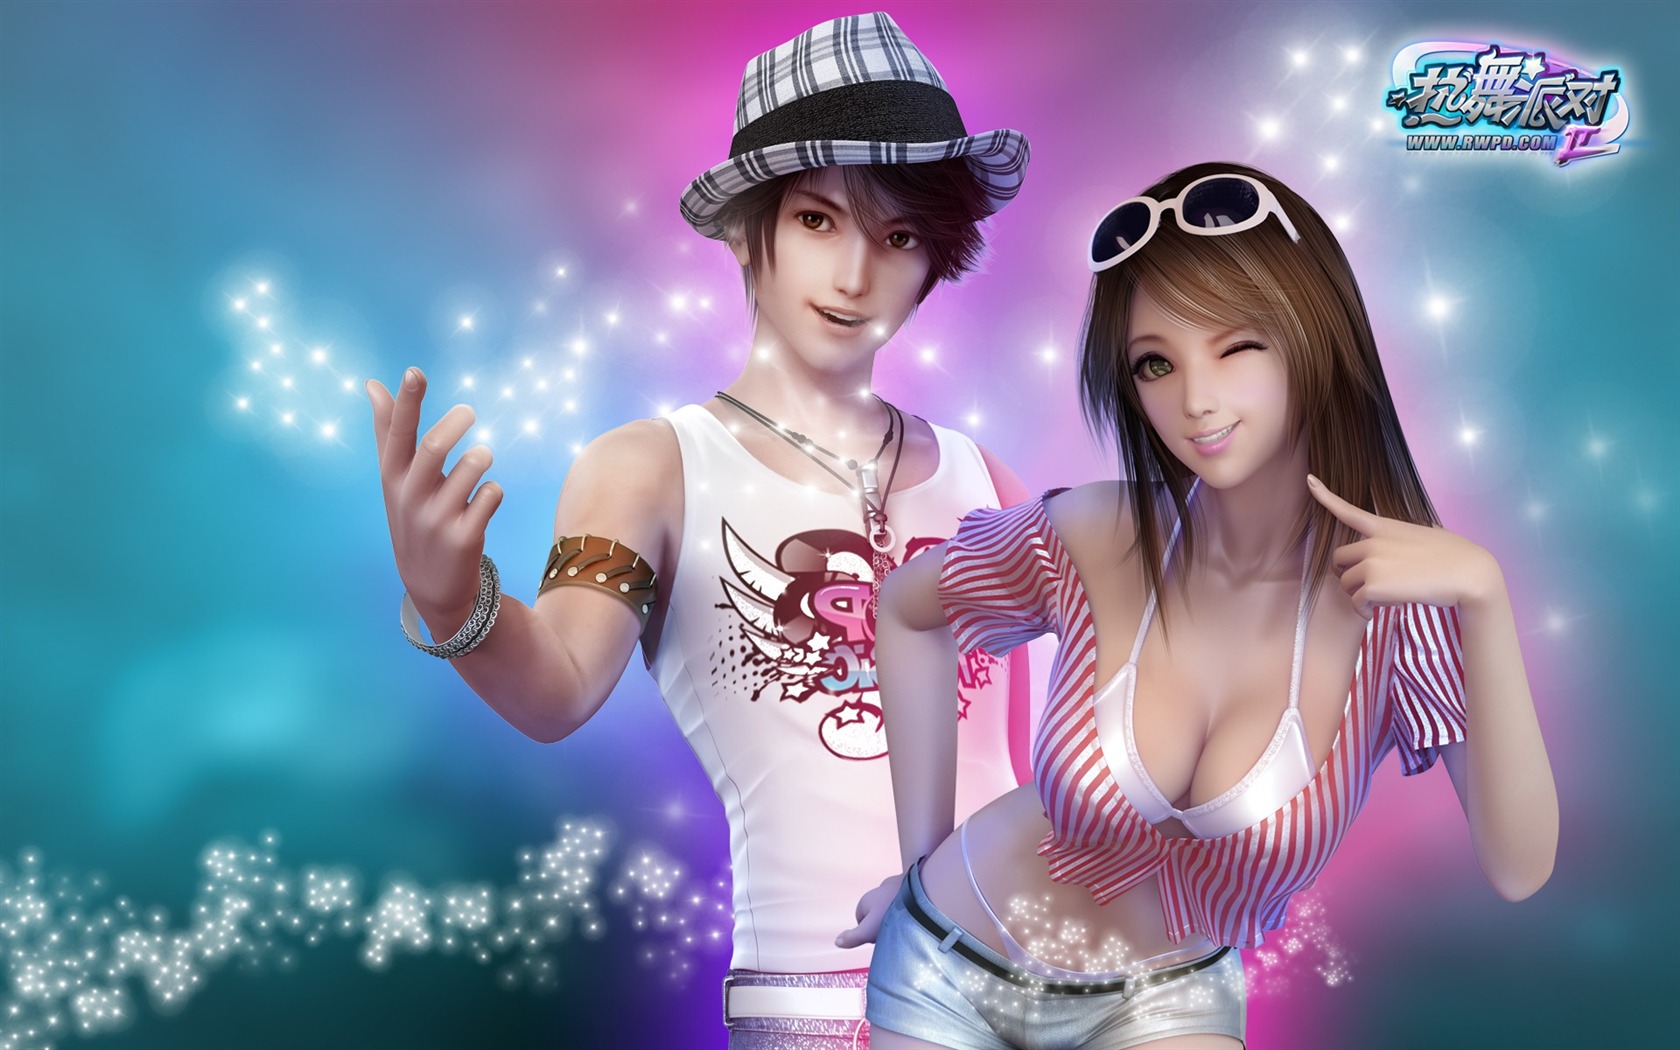 Online game Hot Dance Party II official wallpapers #6 - 1680x1050